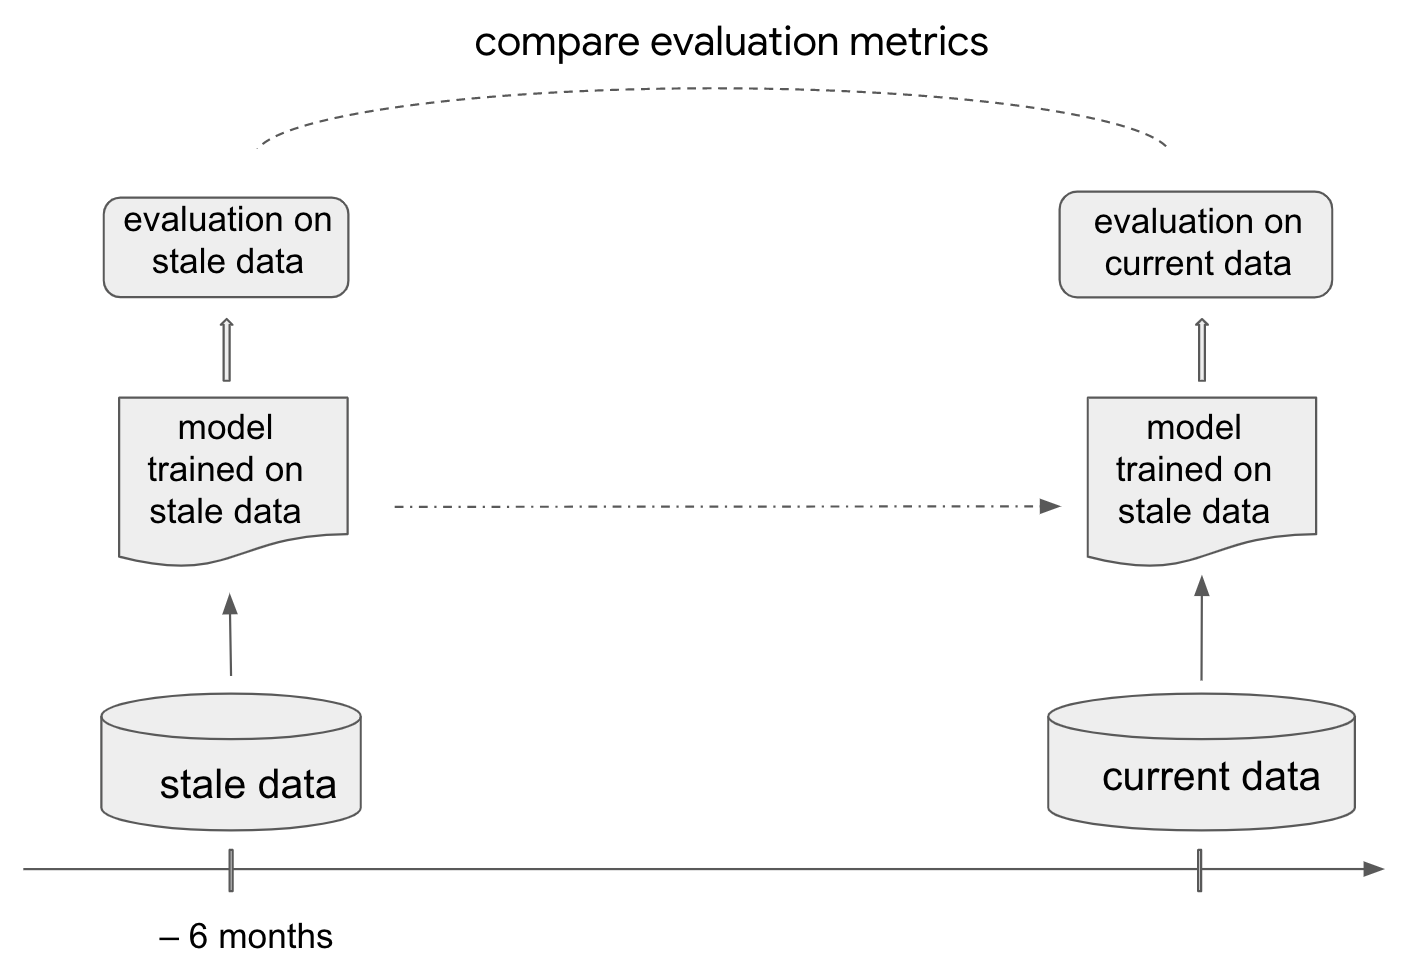 Training a model on stale data and evaluating on current data mimics the continued model evaluation process in an offline environment. 